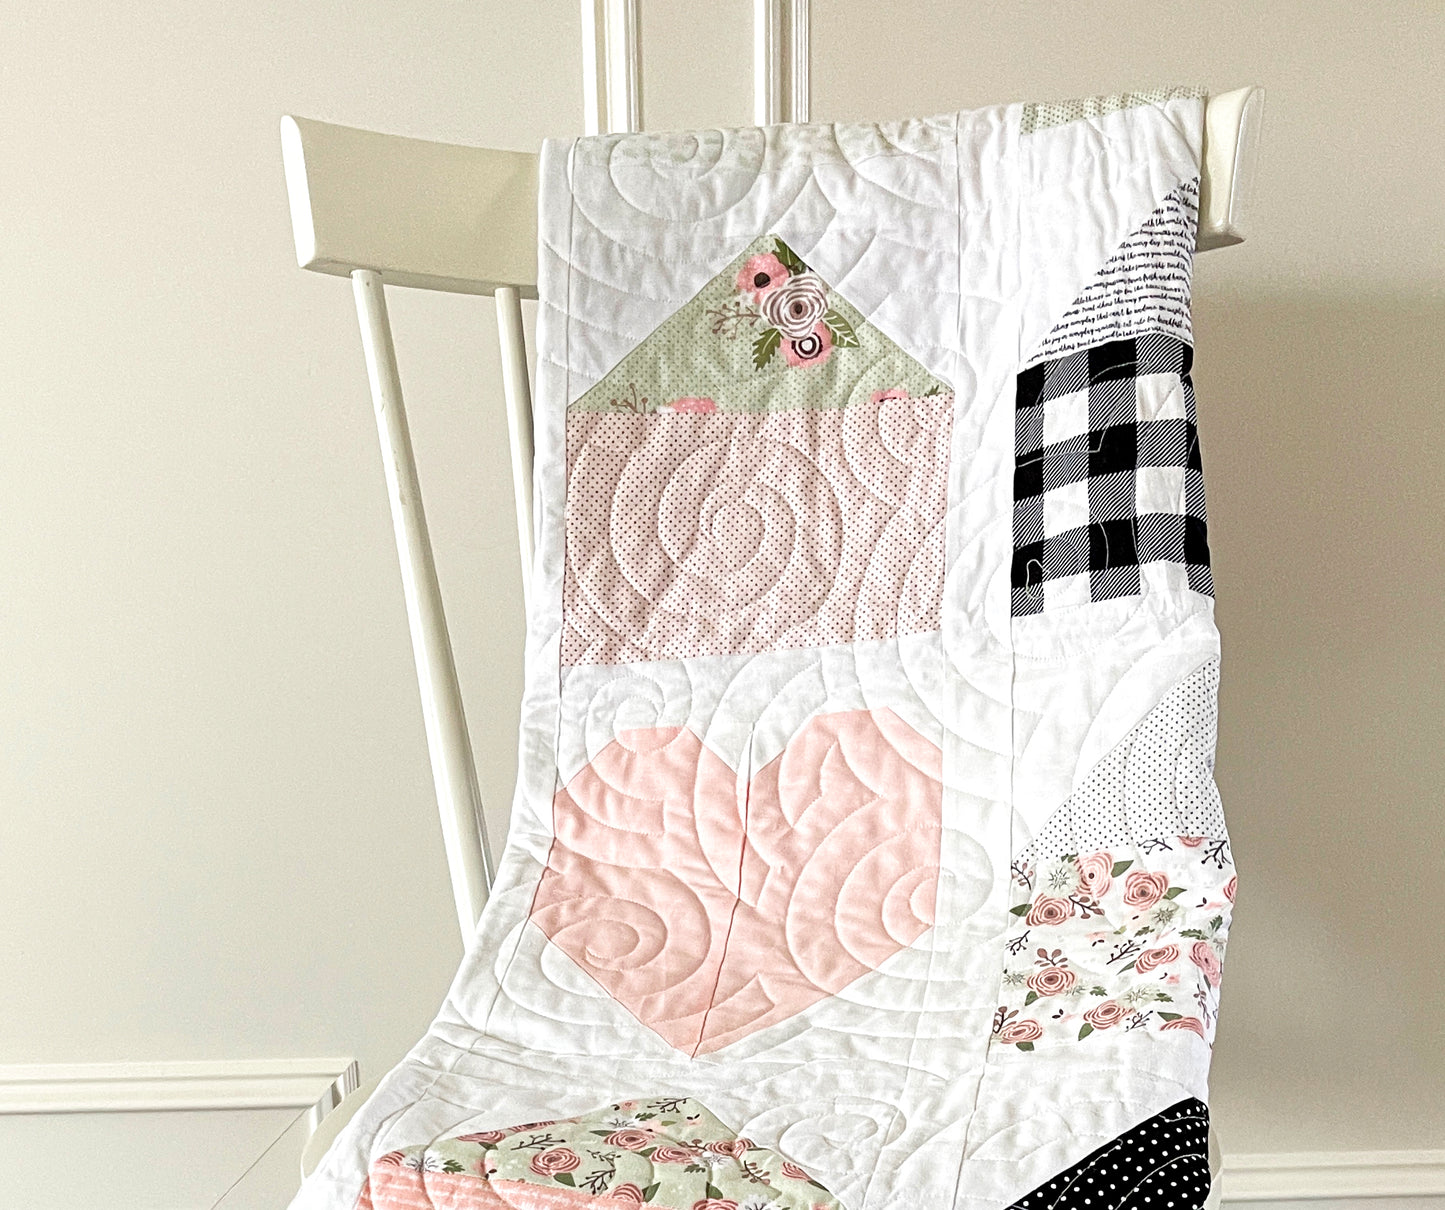 PATTERN (PDF): Home is Where the Heart Is Quilt PDF Pattern (Immediate Download)